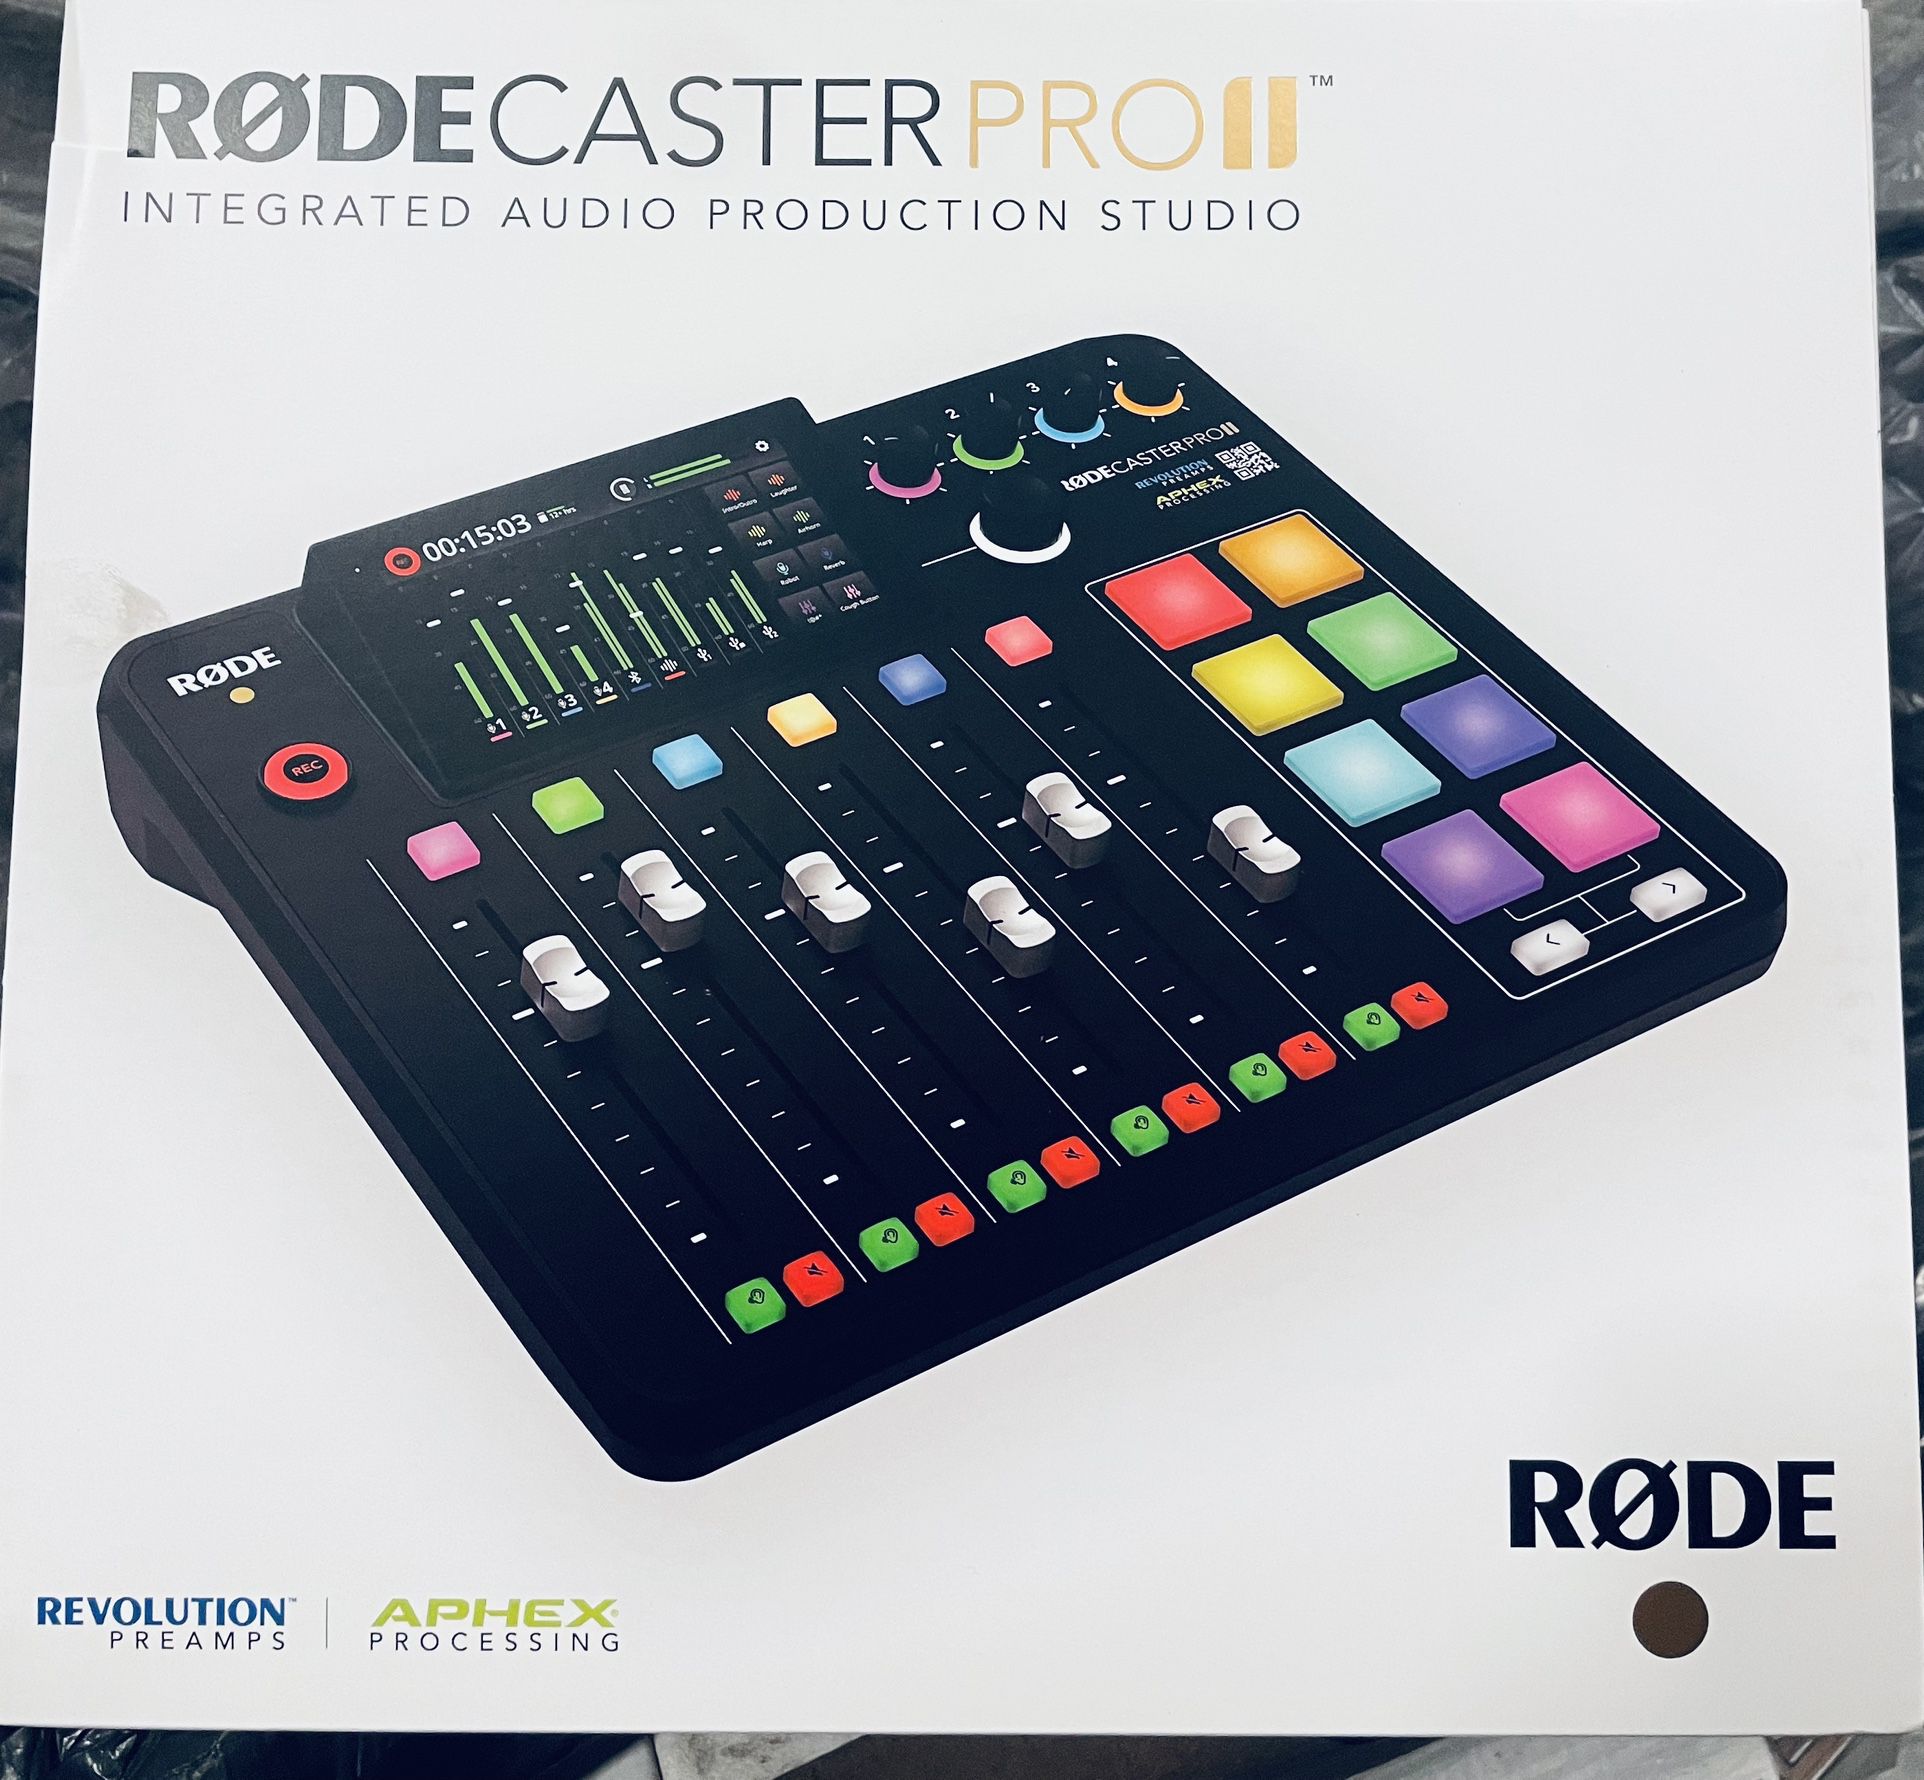 RODE RODECaster Pro II INTEGRATED AUDIO PRODUCTION STUDIO